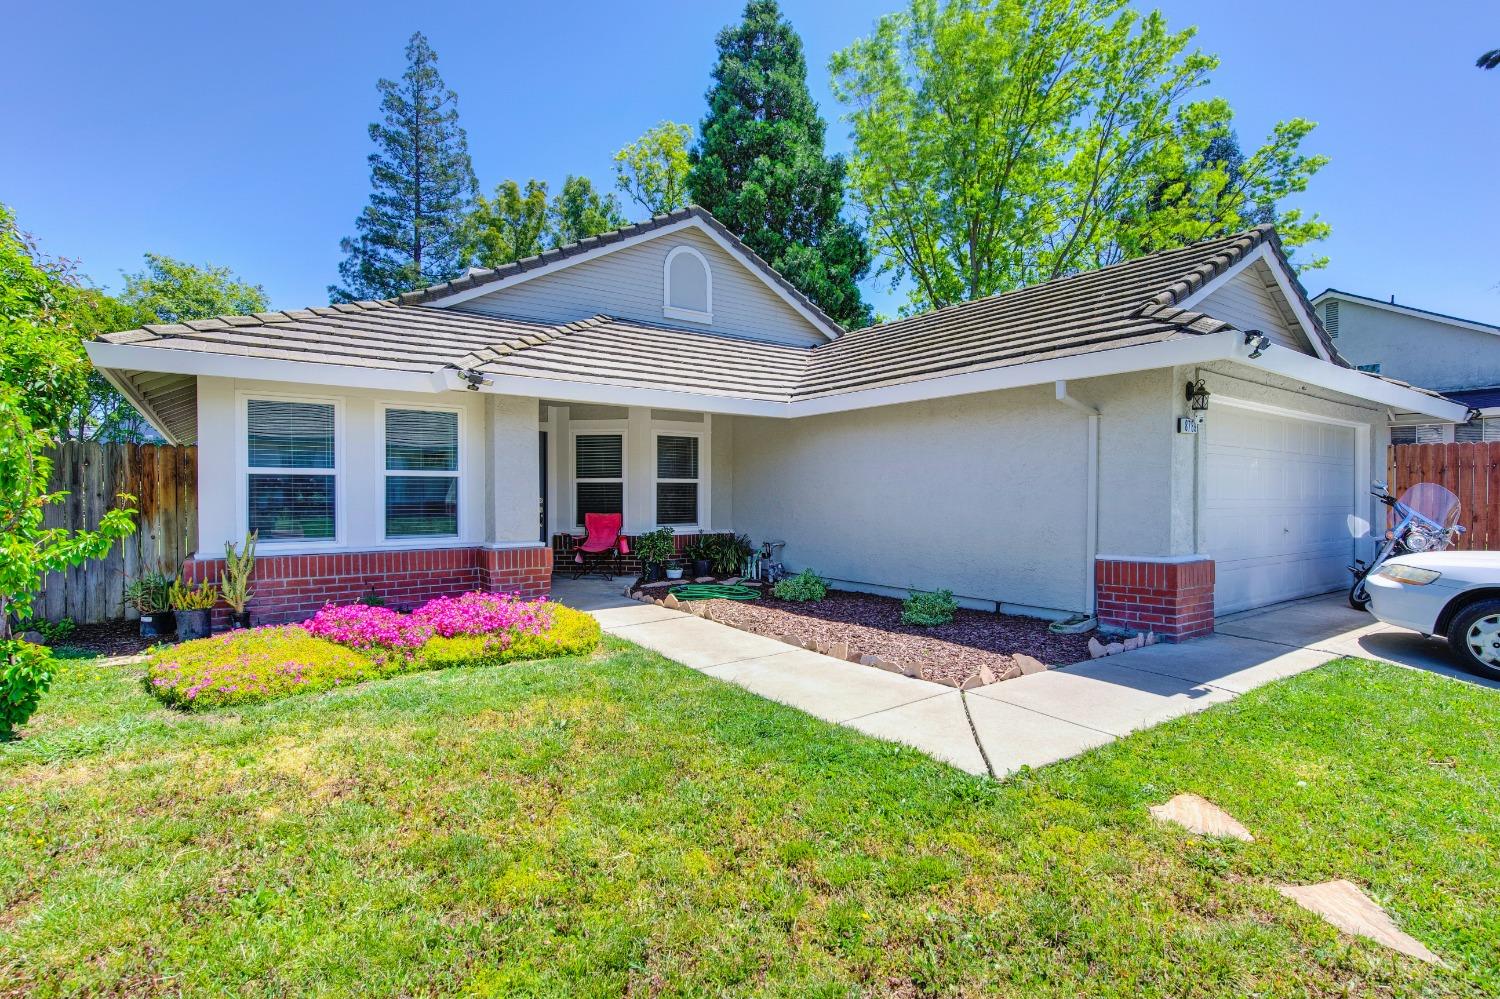 Photo of 8789 Mayberry Wy in Elk Grove, CA